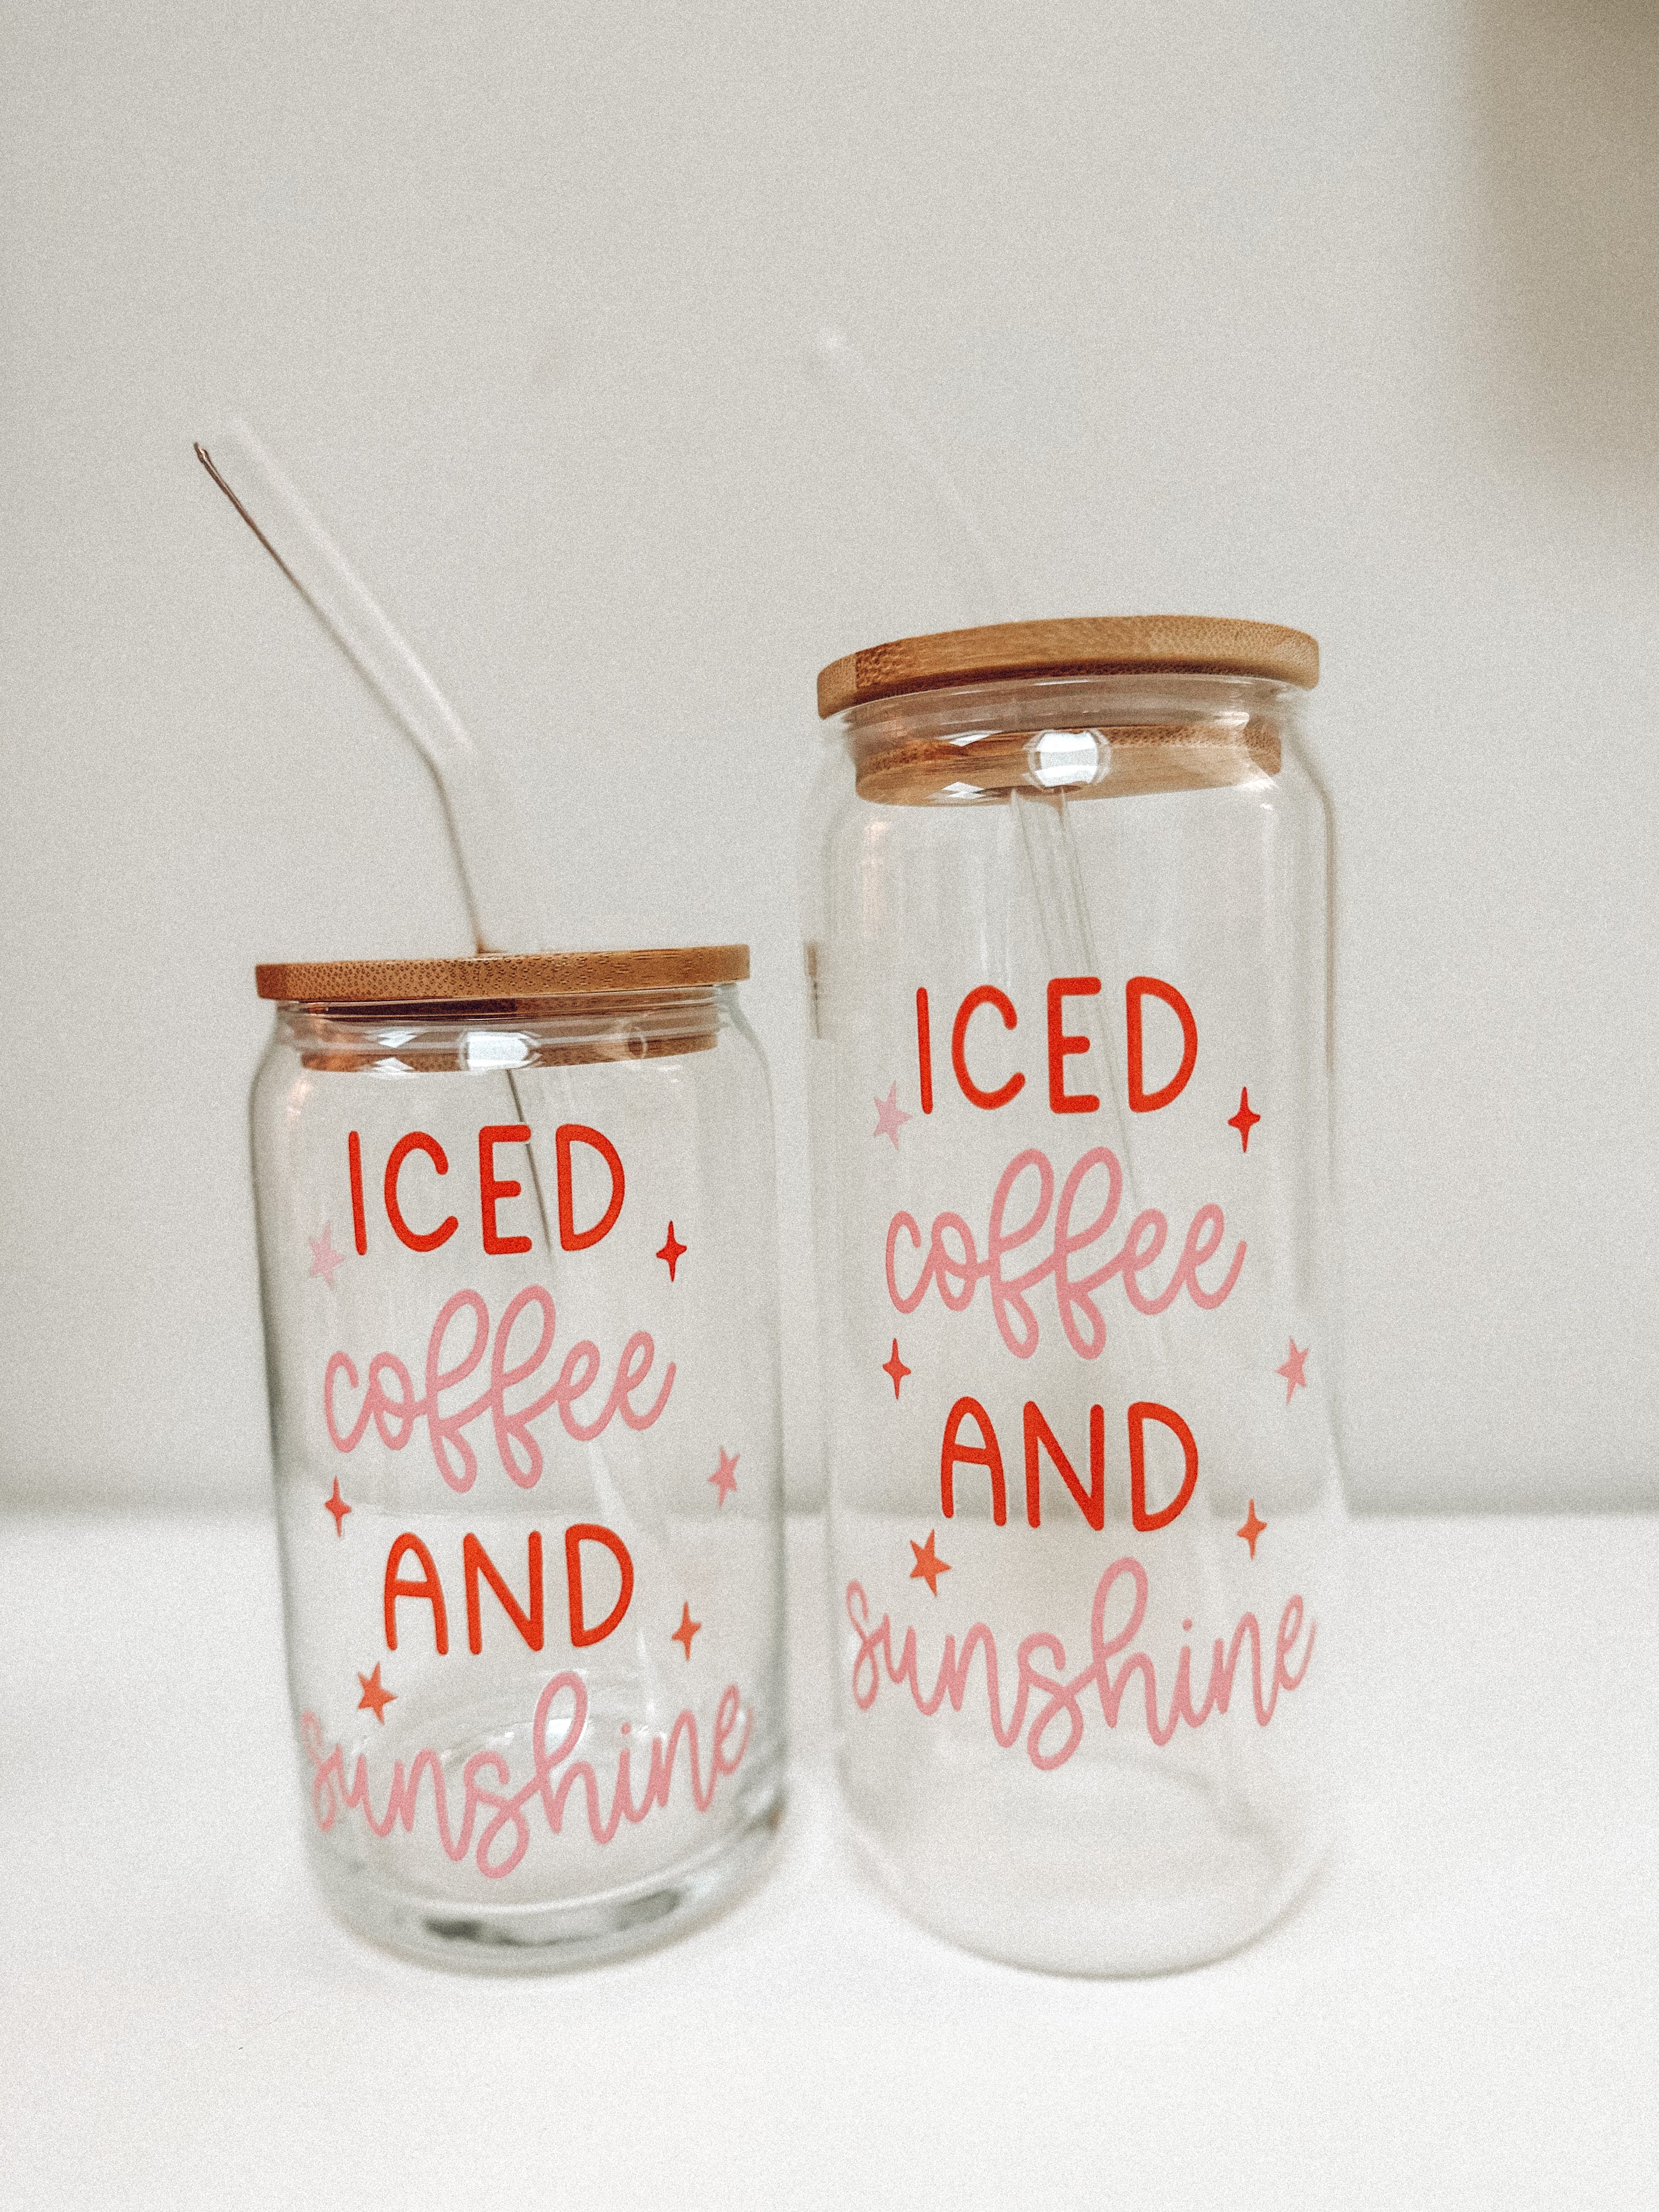 Buy GMISUN Iced Coffee Cup, 16oz Glass Tumbler with Straw and Lid